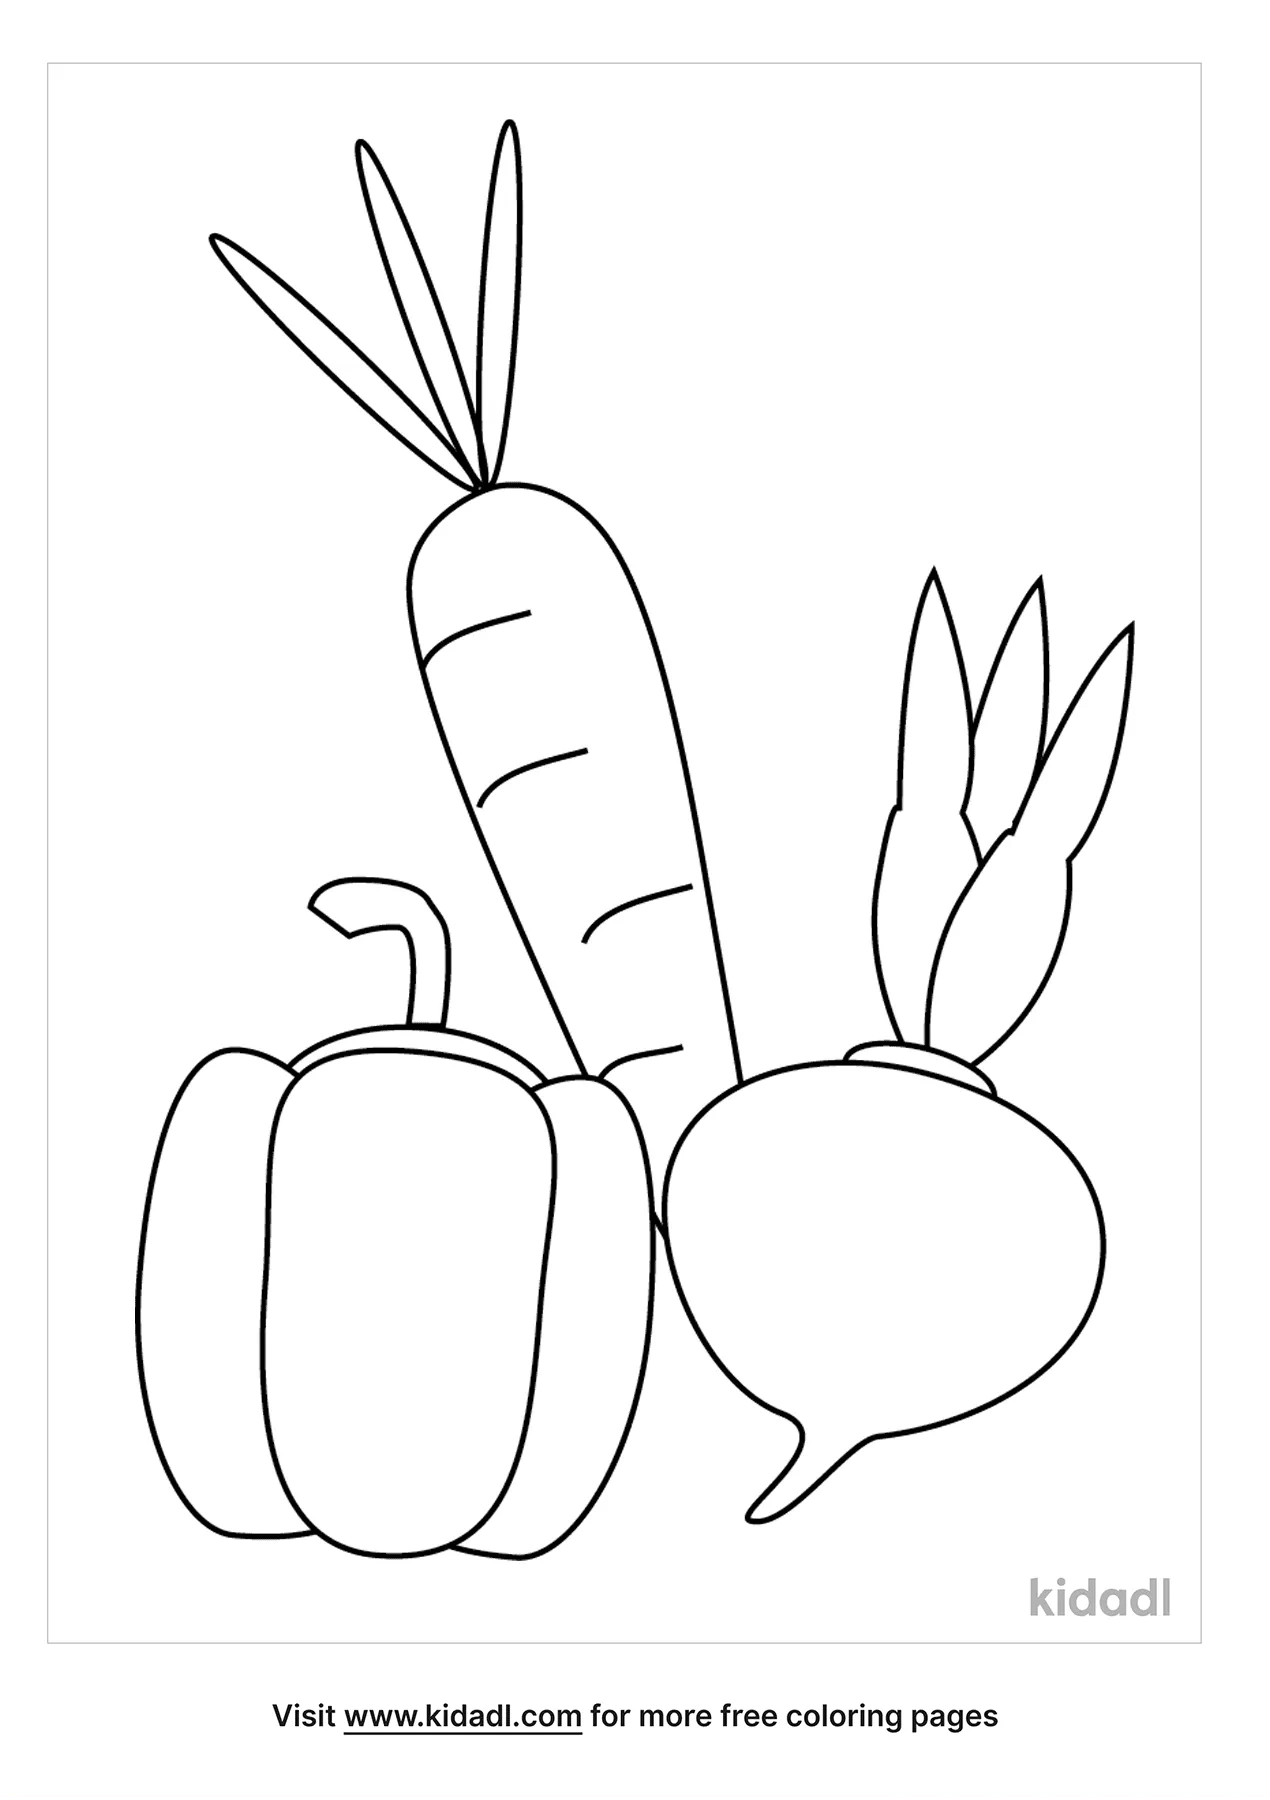 Fruit And Vegetables Coloring Pages   Free Food and drinks ...